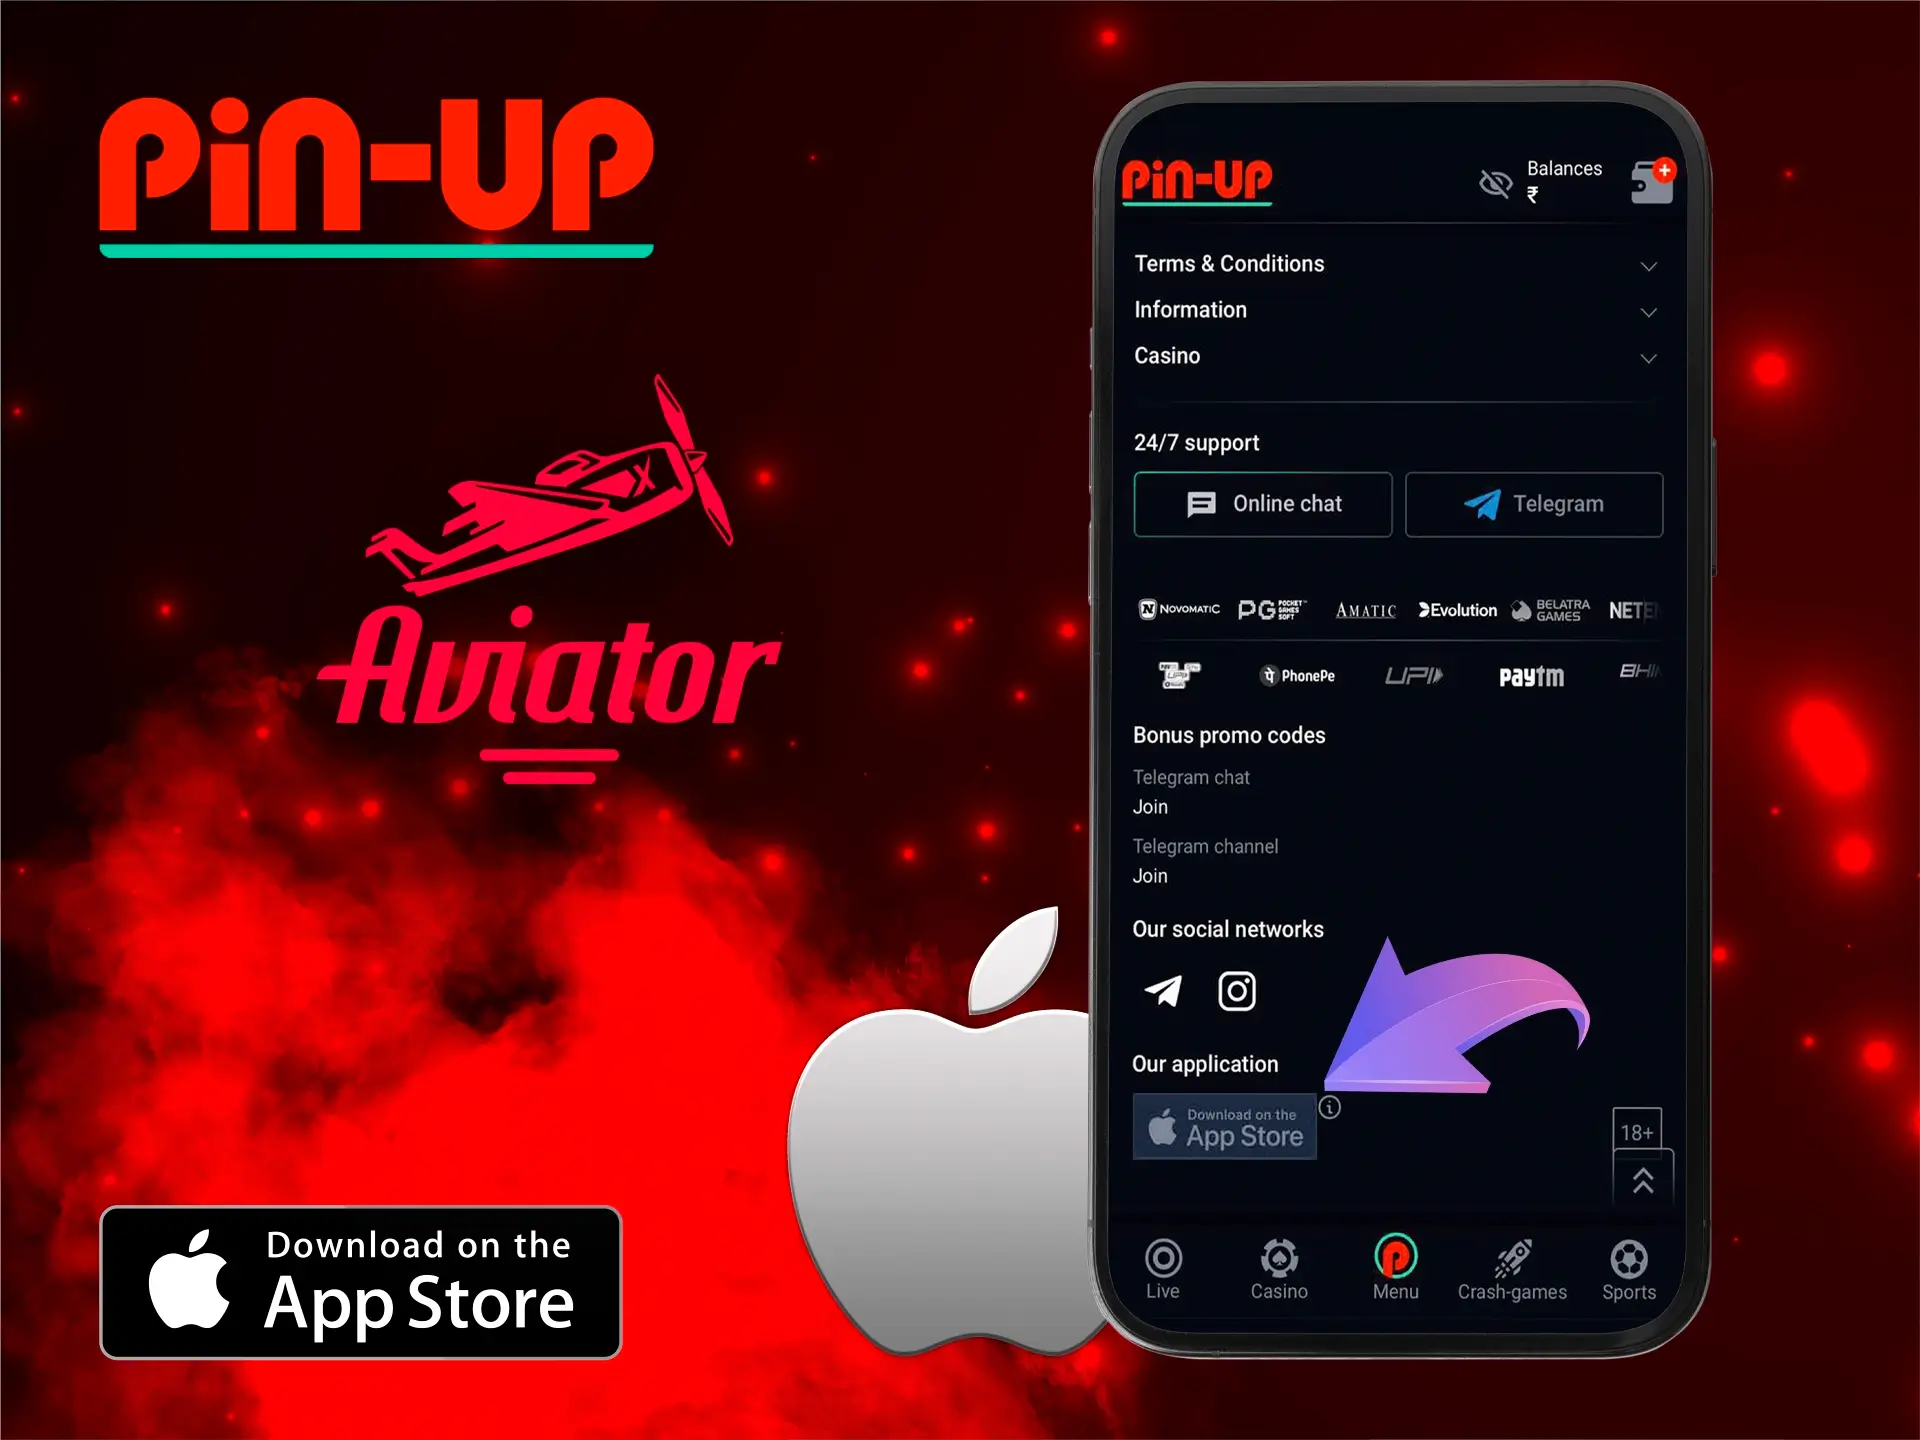 Download the Pin-Up mobile app for iOS to start playing Aviator and immerse yourself in a world of excitement and winning.